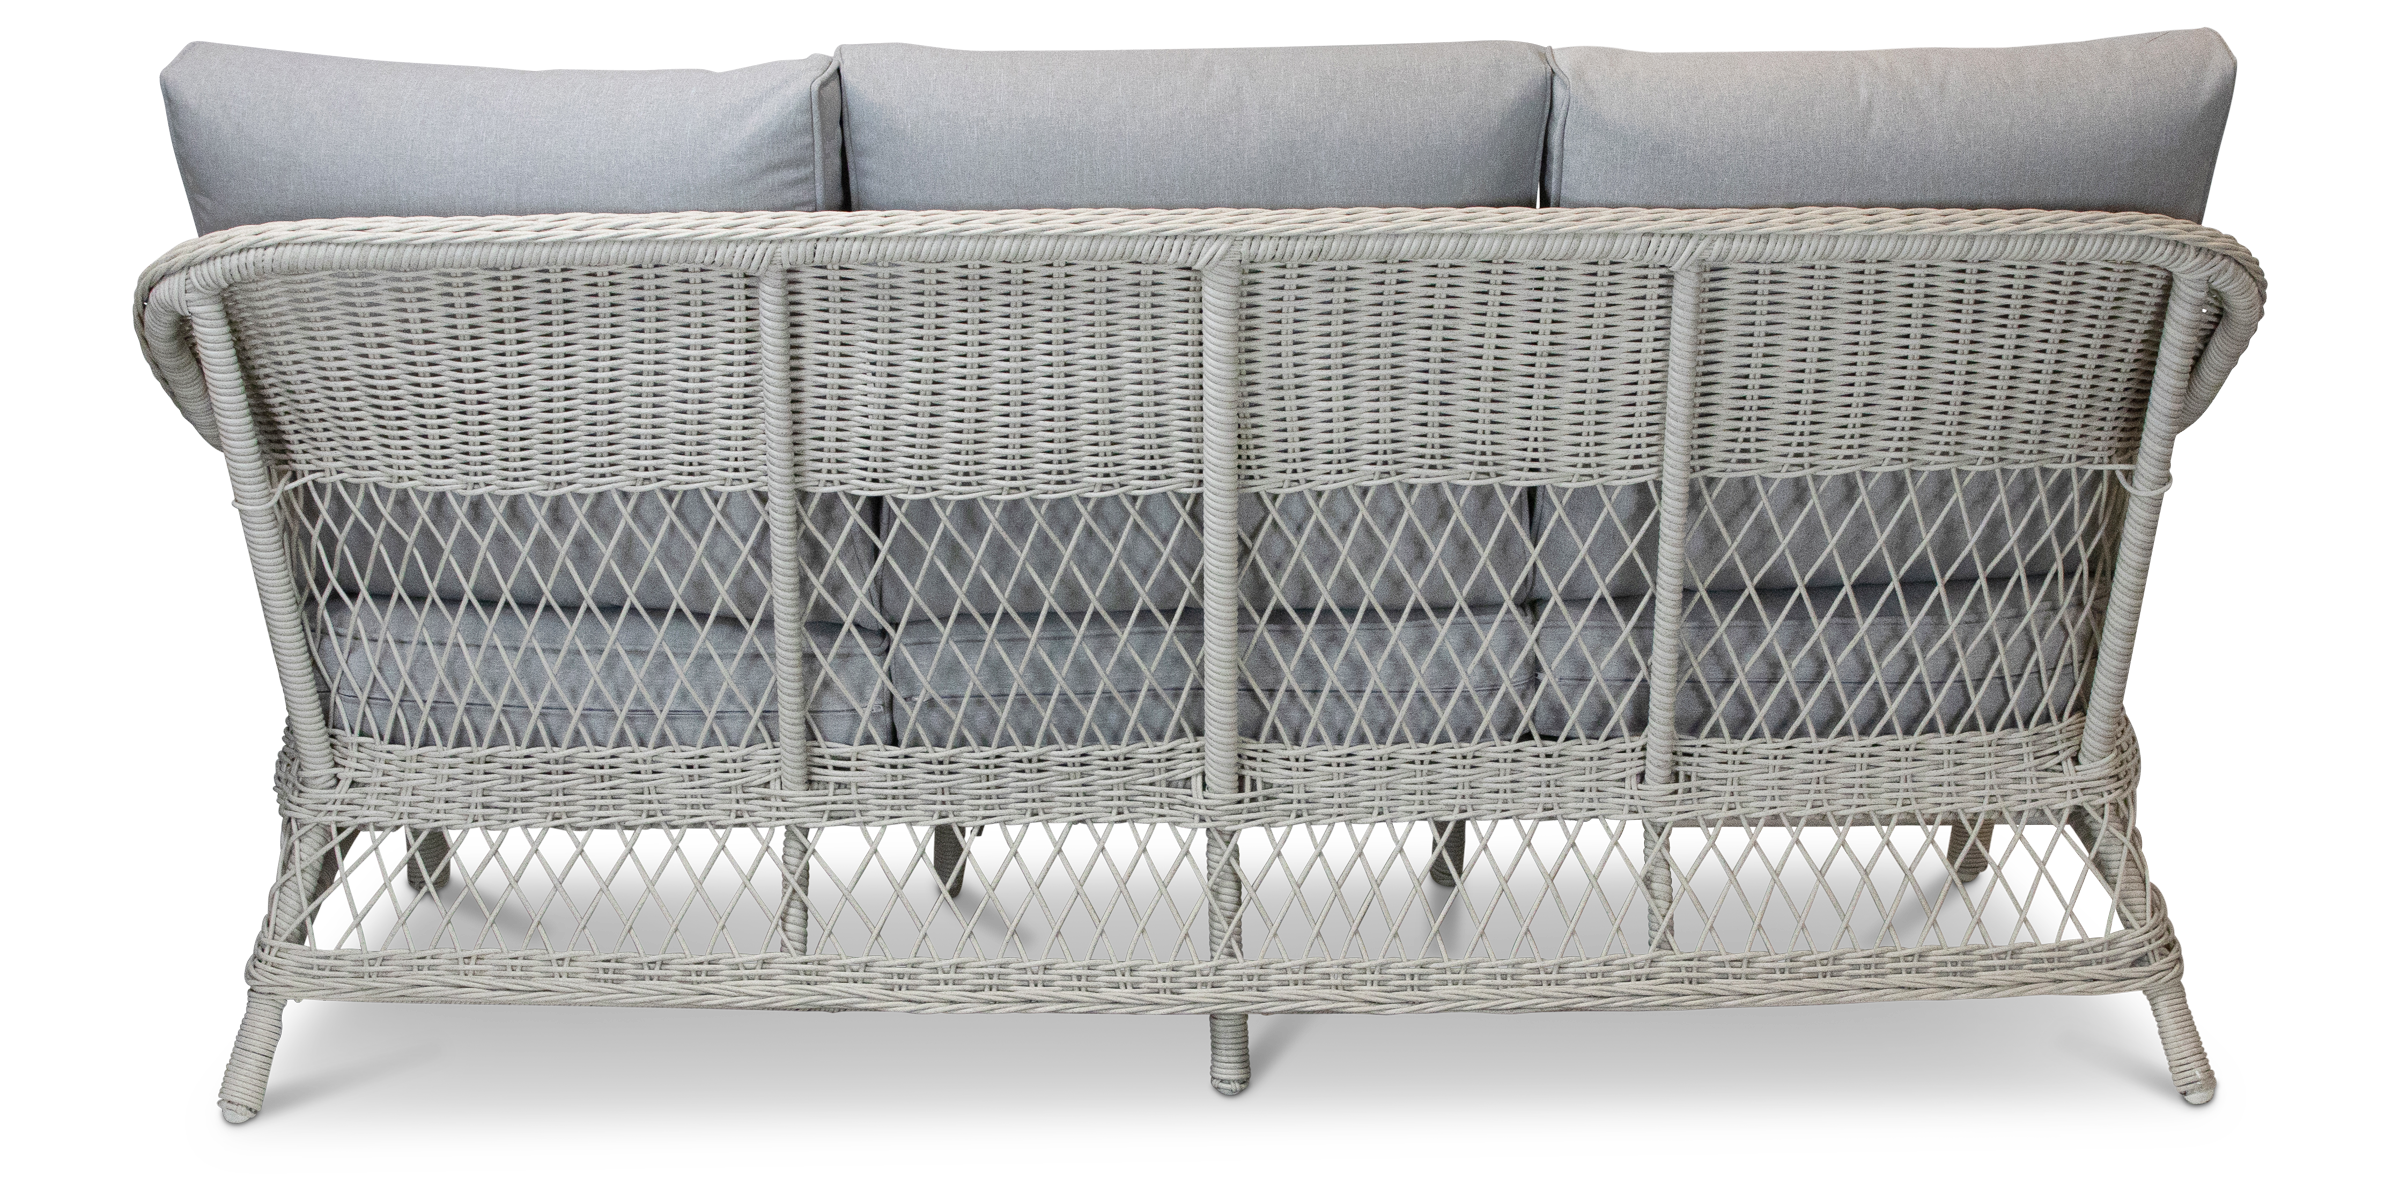 Hamptons 3 Seater in Surfmist Wicker and Dune Spunpoly Cushions